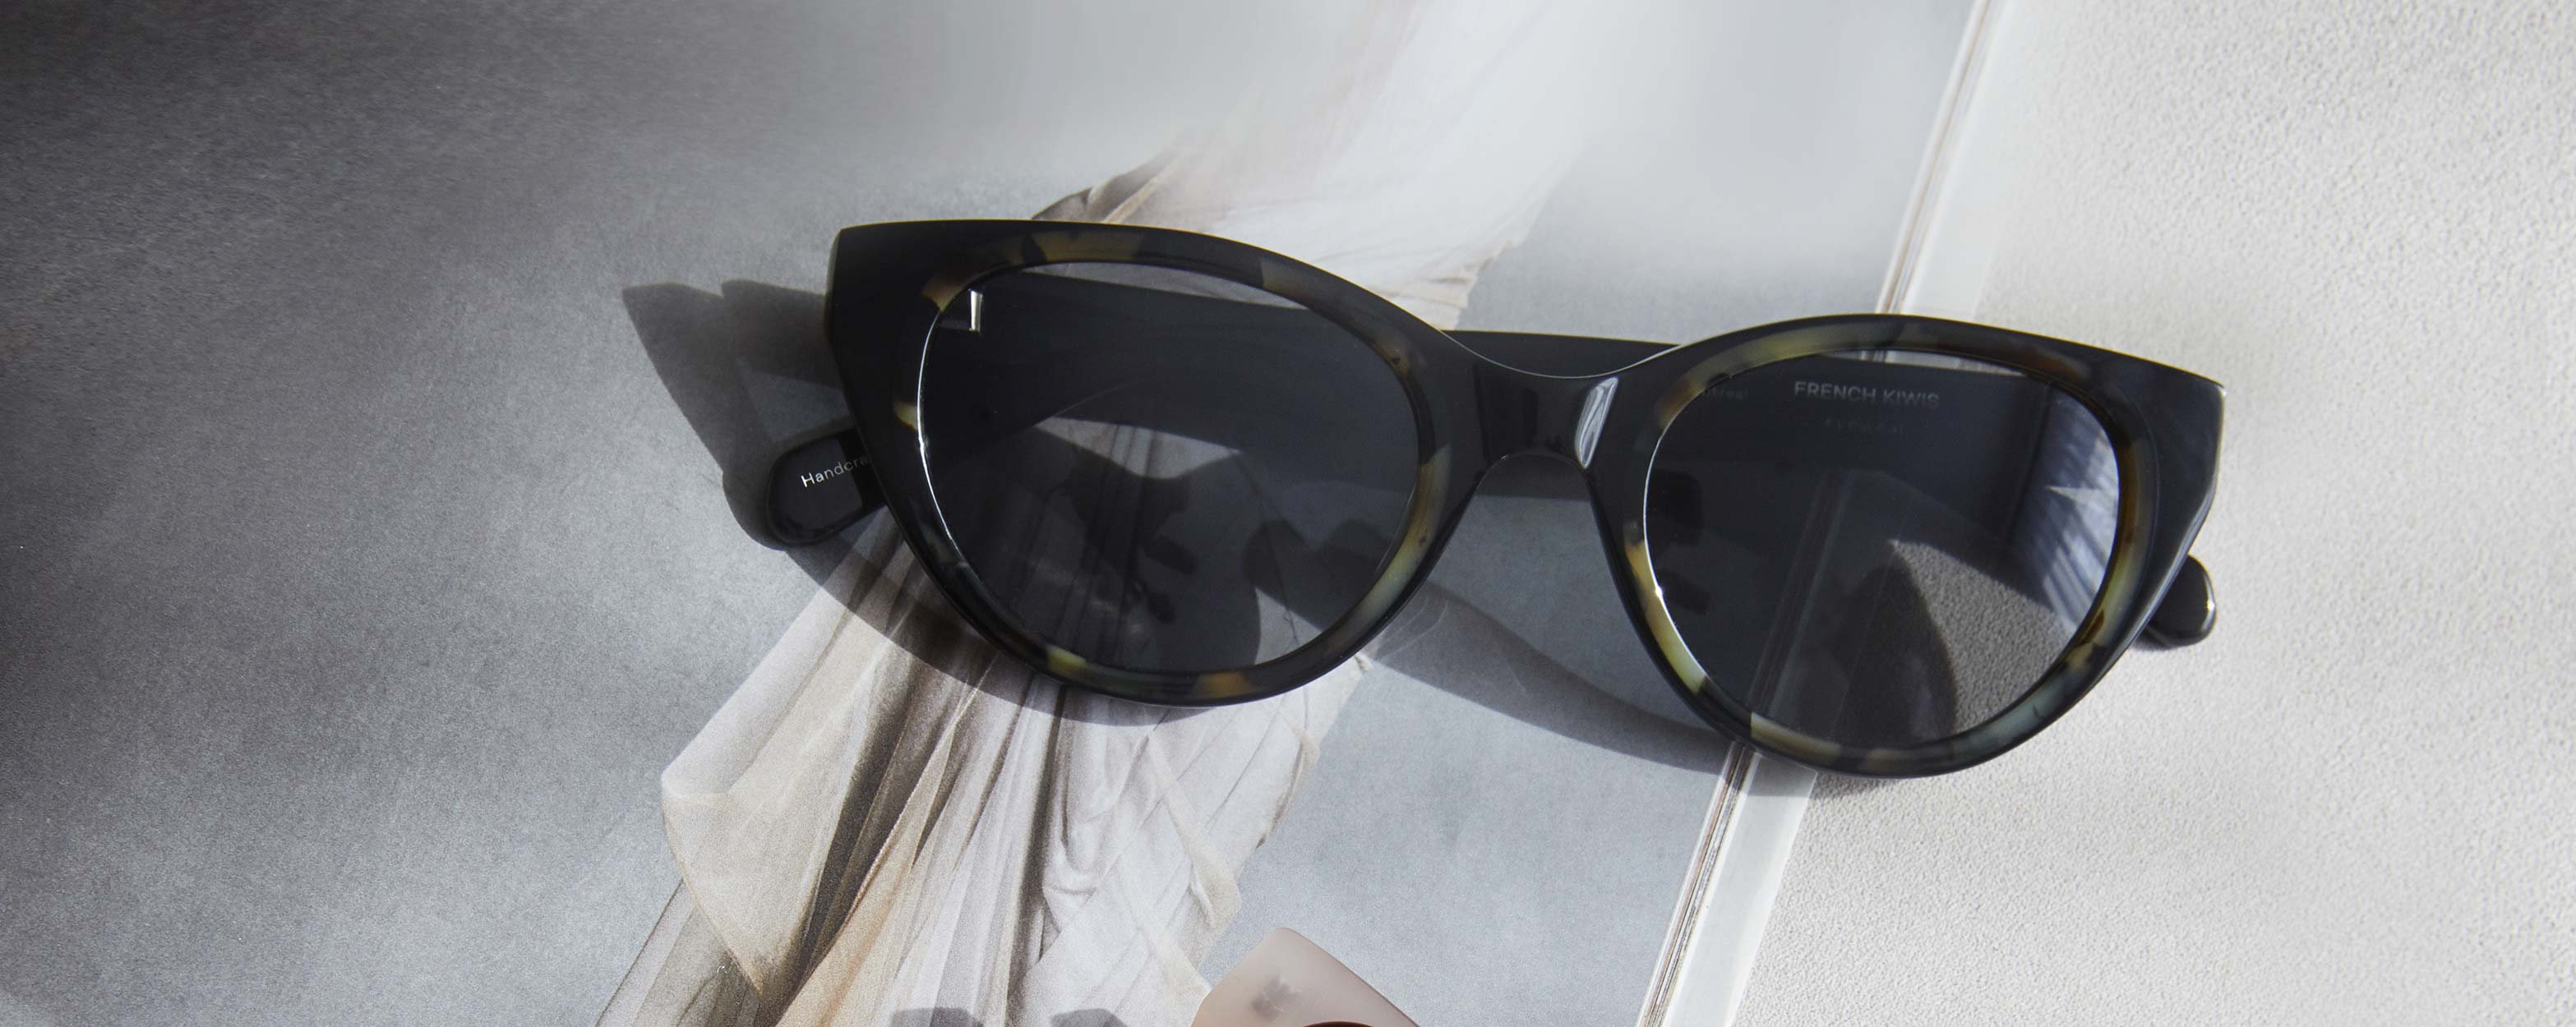 Photo Details of Colette Sun Nude & Tortoise Sun Glasses in a room